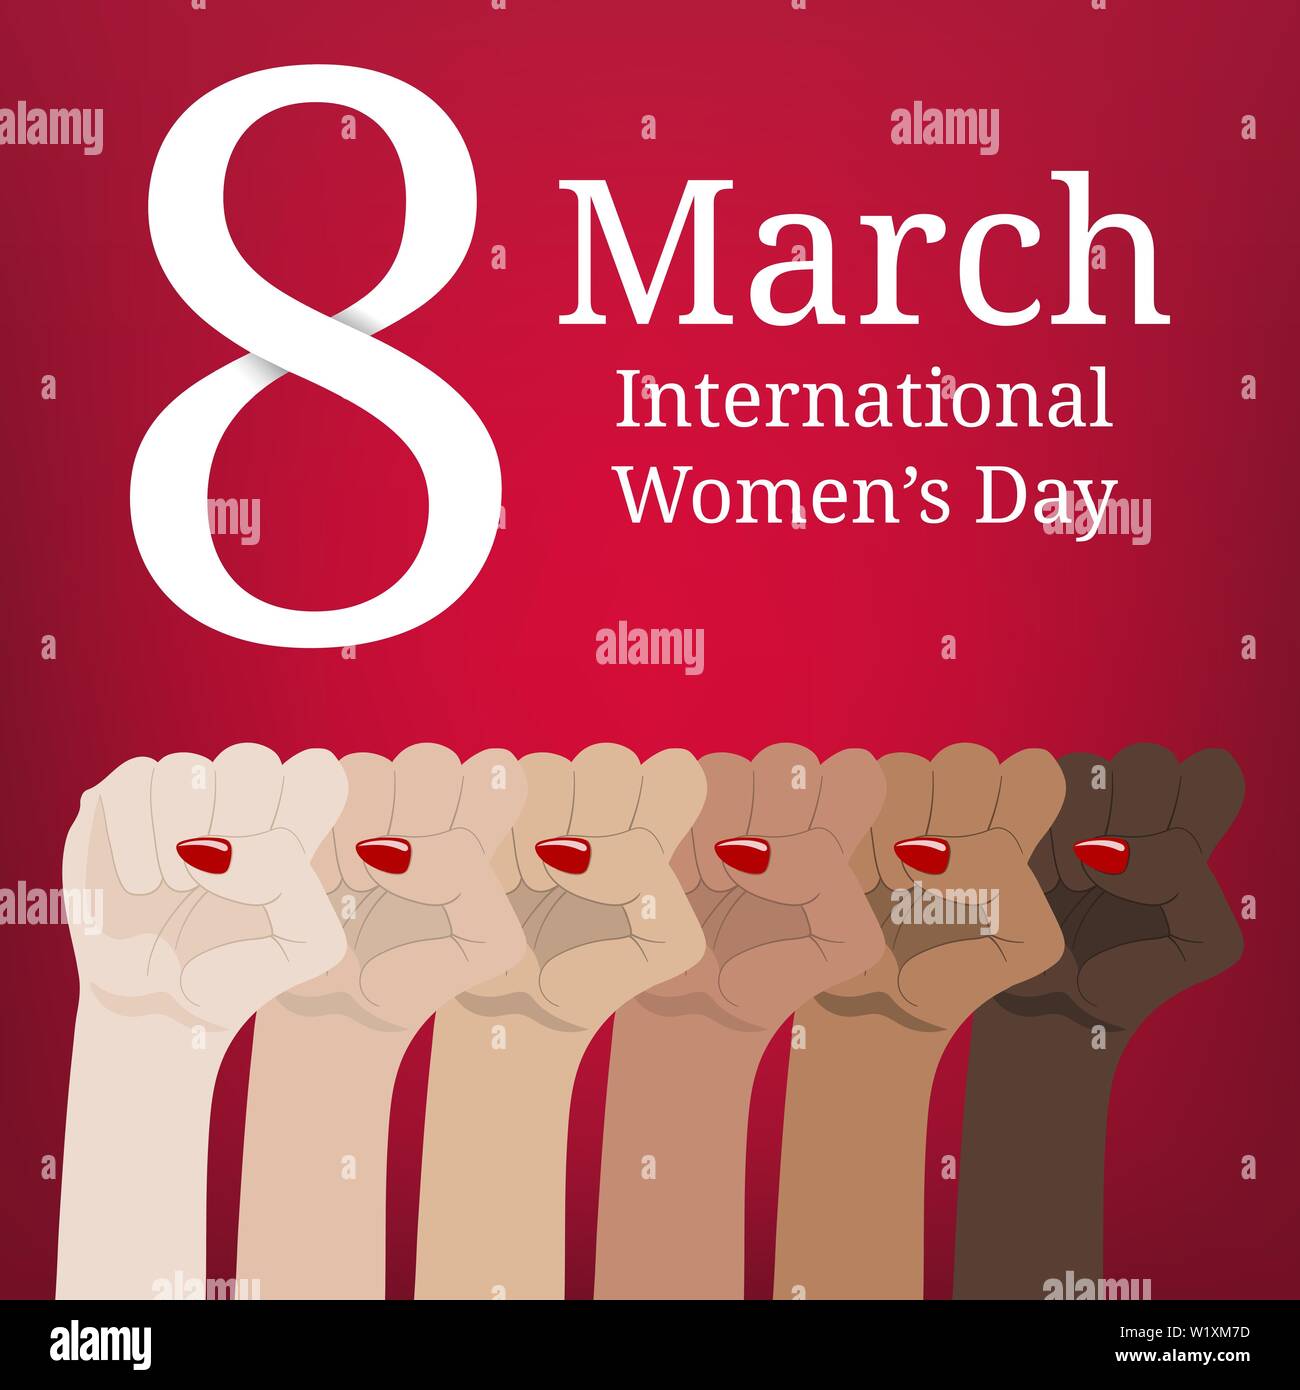 International Women's Day. Women's March. Multinational Equality. Female hand with her fist raised up. Girl Power. Feminism concept. Vector illustrati Stock Vector